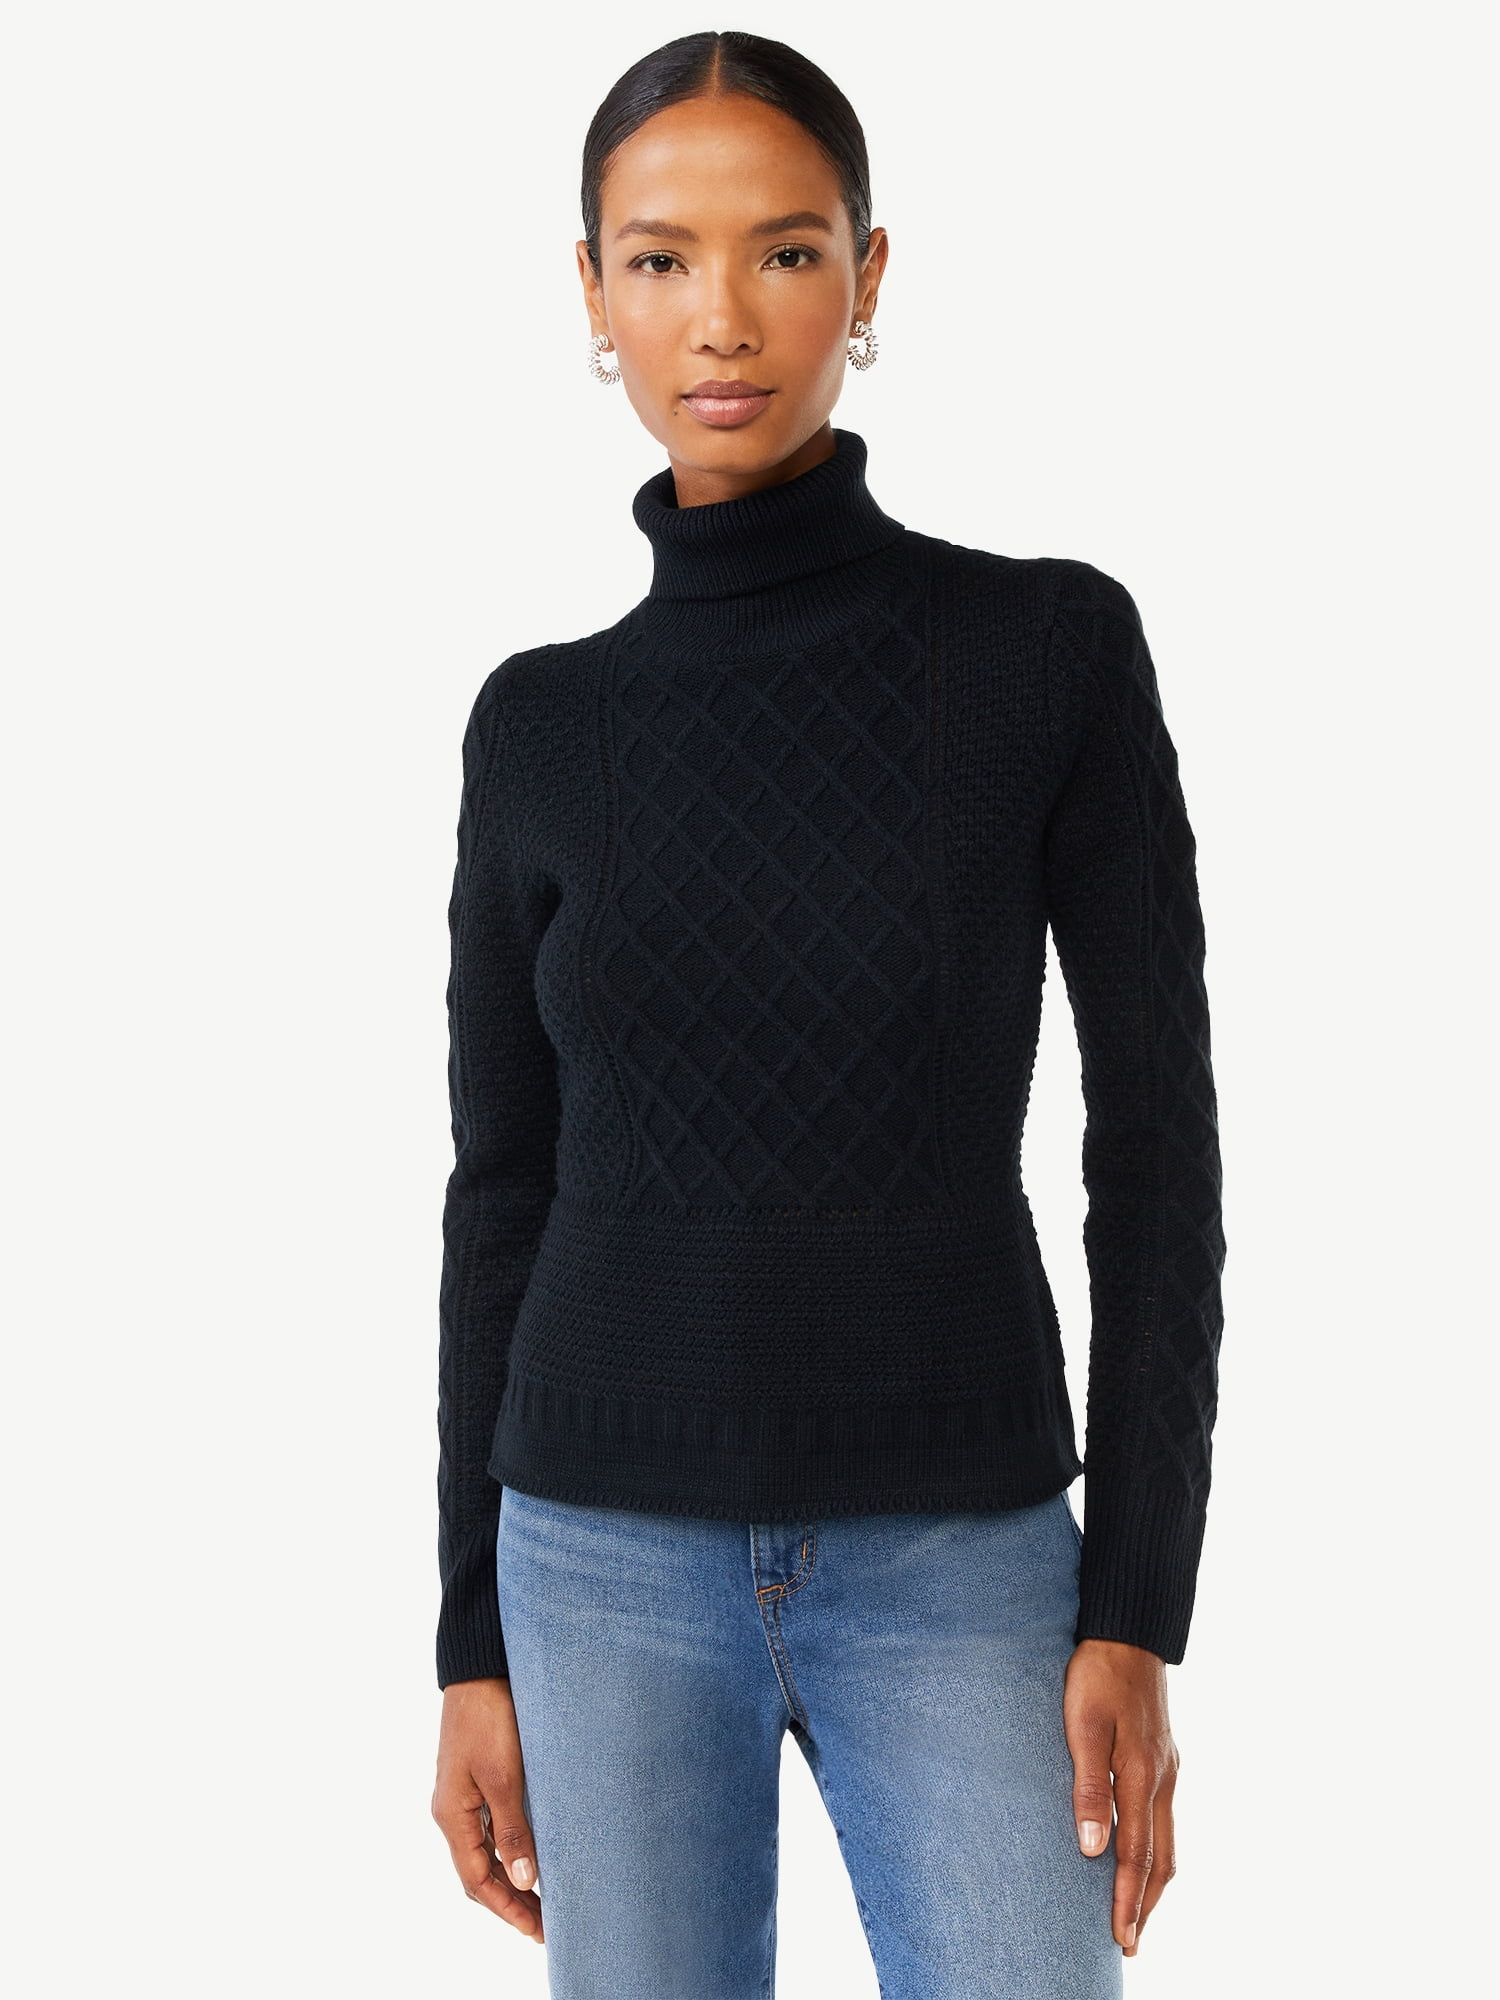 Scoop Women's Cable Knit Pullover Sweater with Long Sleeves, Sizes XS-XXL | Walmart (US)